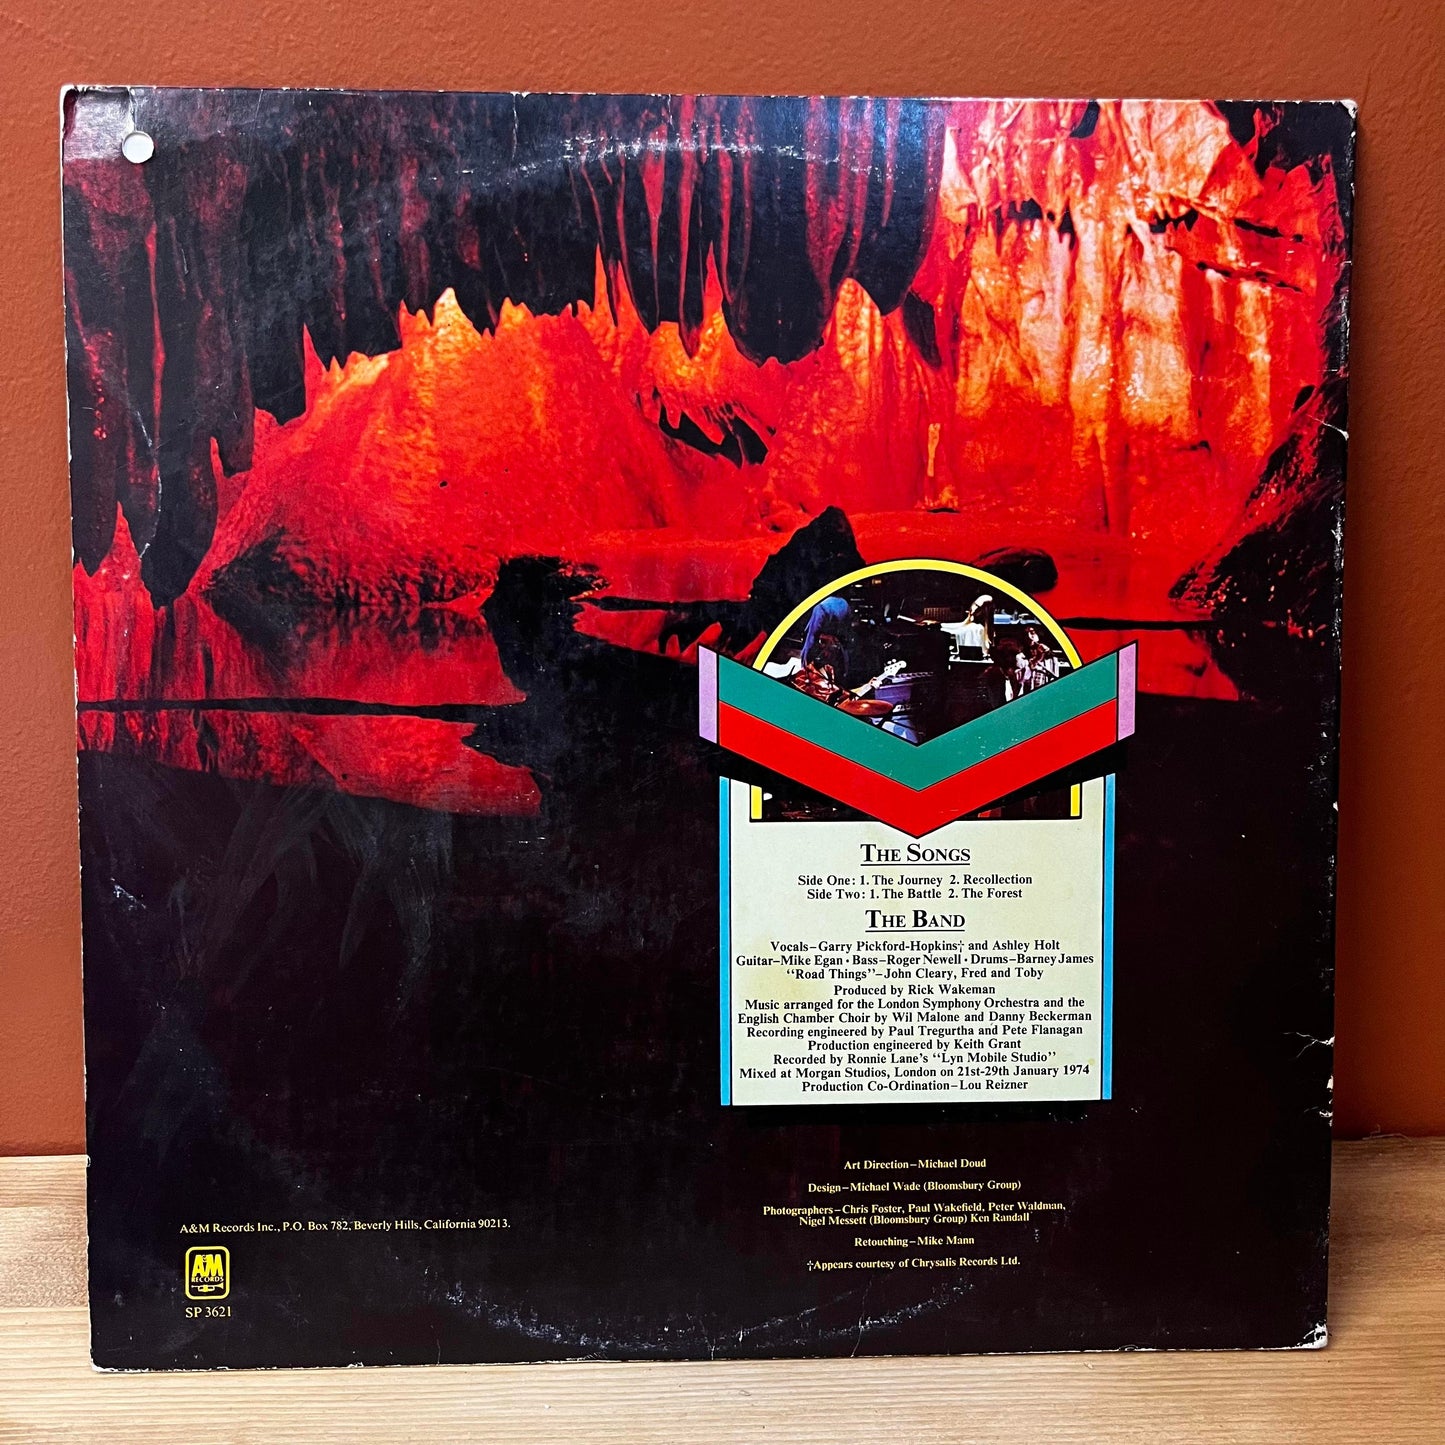 Journey To The Centre of the Earth - Rick Wakeman Promo Copy SP 3621 Used Vinyl VG+